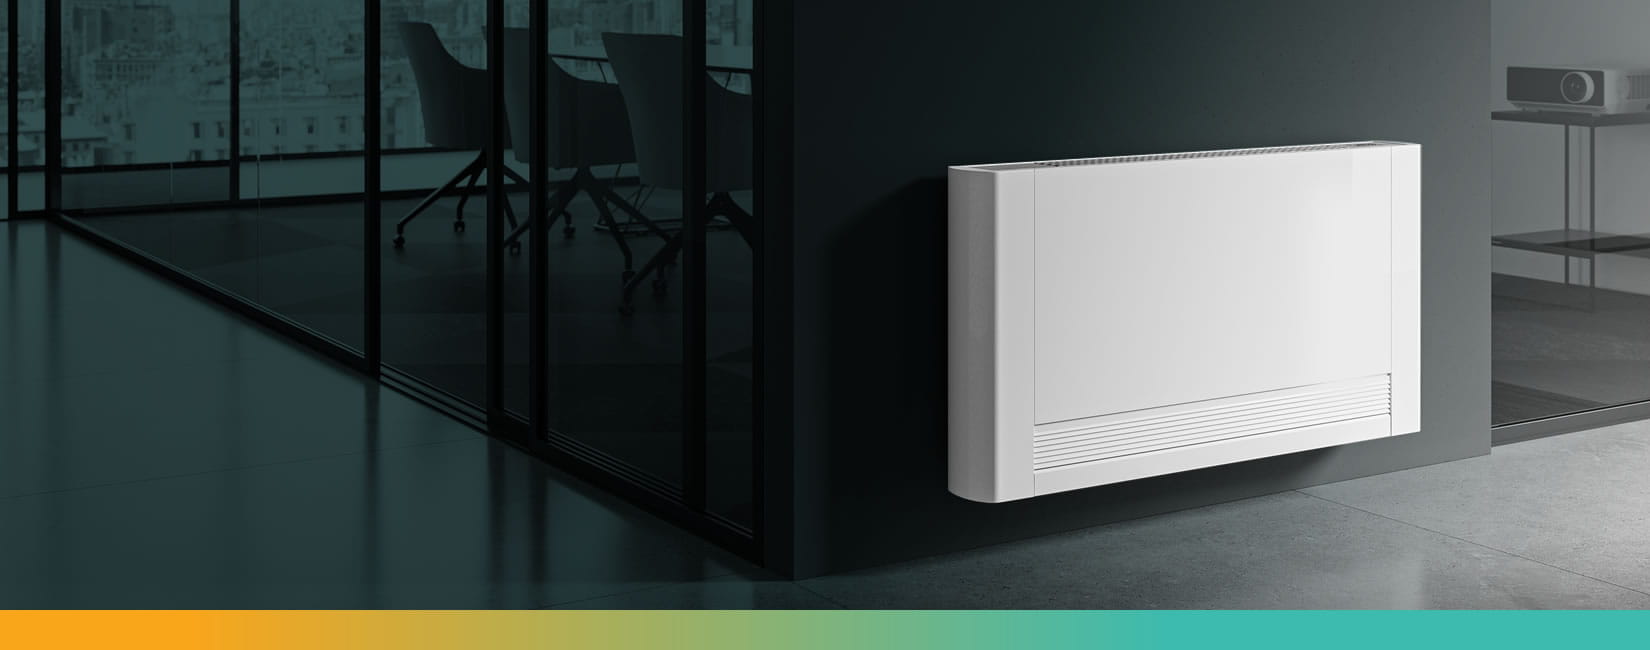 iVector S2 - A new generation of fan convector